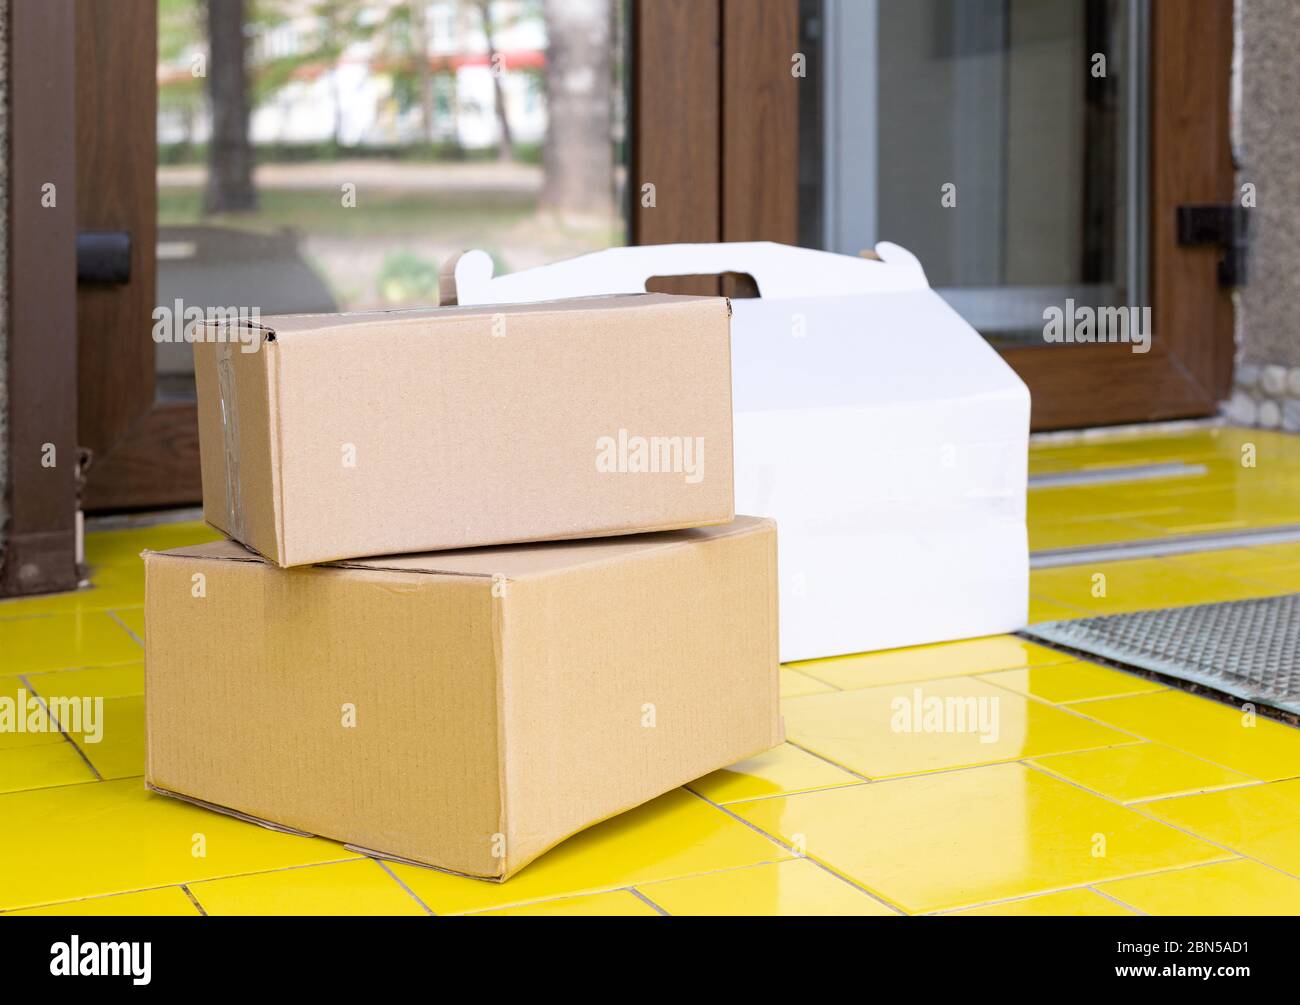 Delivery boxes on doorstep at home. Contactless food delivery. Safe shopping E-commerce purchase parcels at home. Boxes delivered to front door by Stock Photo